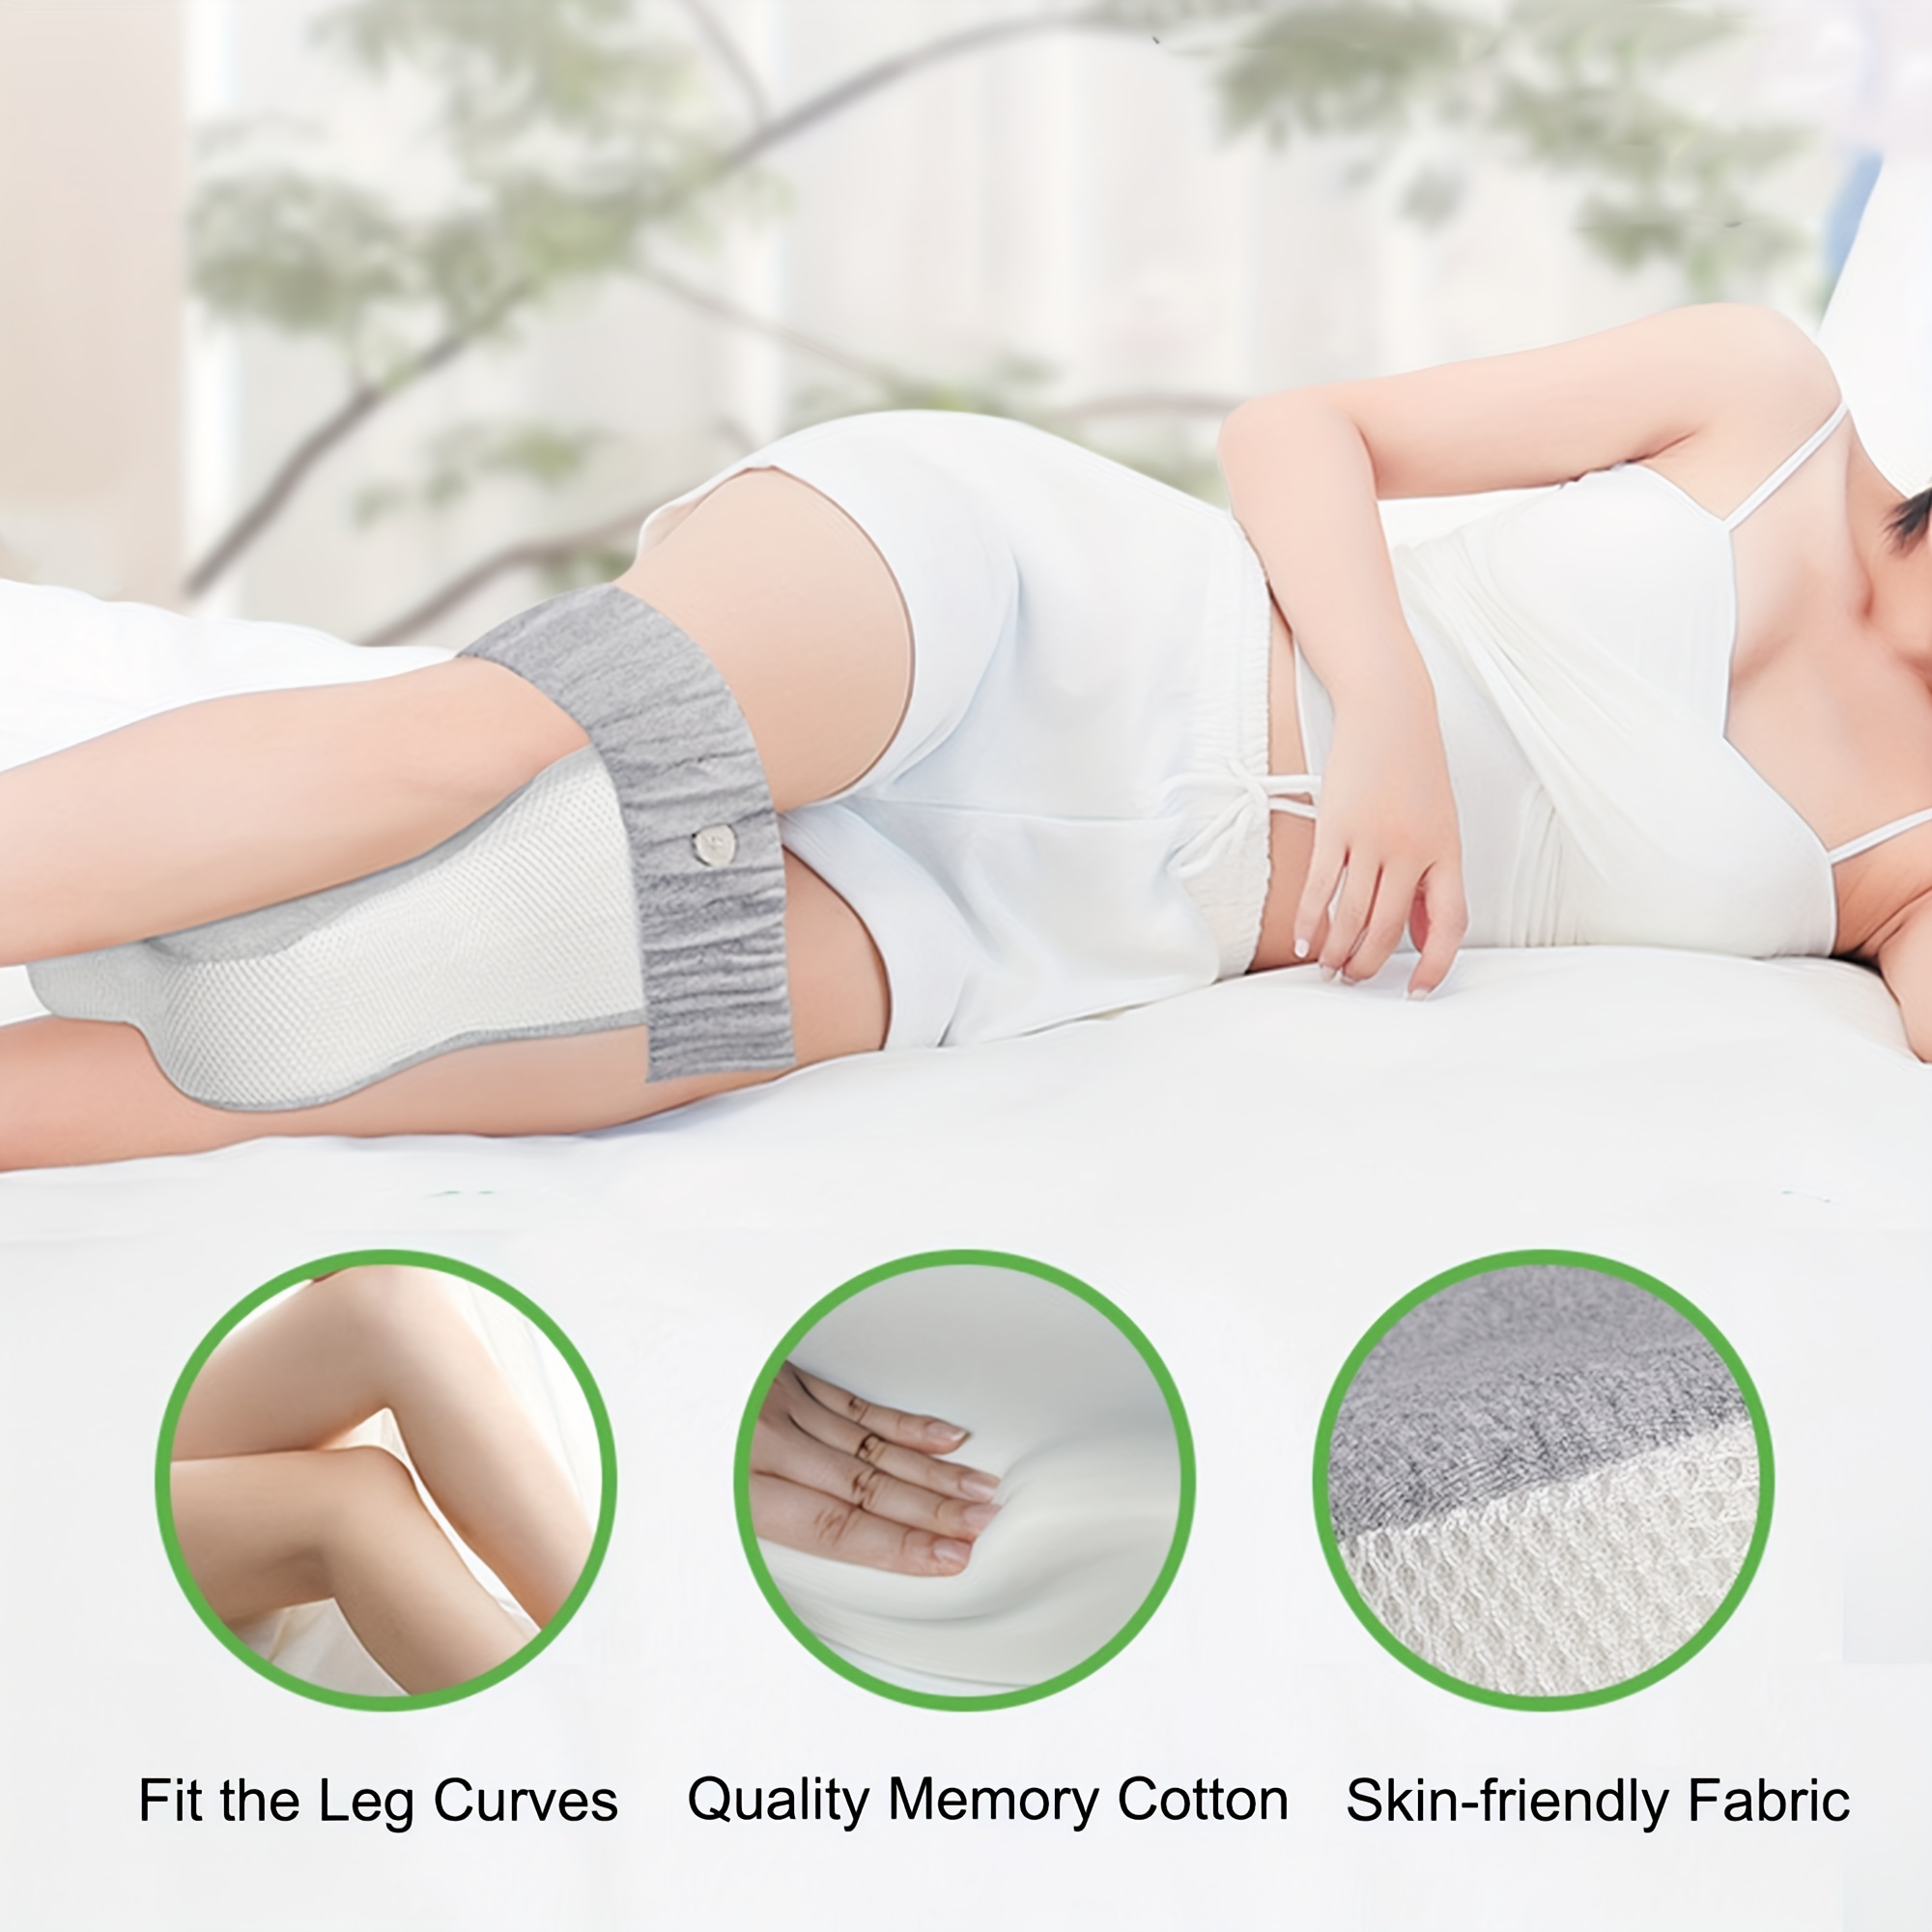 Smooth Spine Alignment Pillow, Smooth Spine Pillow, Leg Pillow for Side  Sleeping, Smooth Spine Knee Pillow, Pillow for Between Knees While  Sleeping